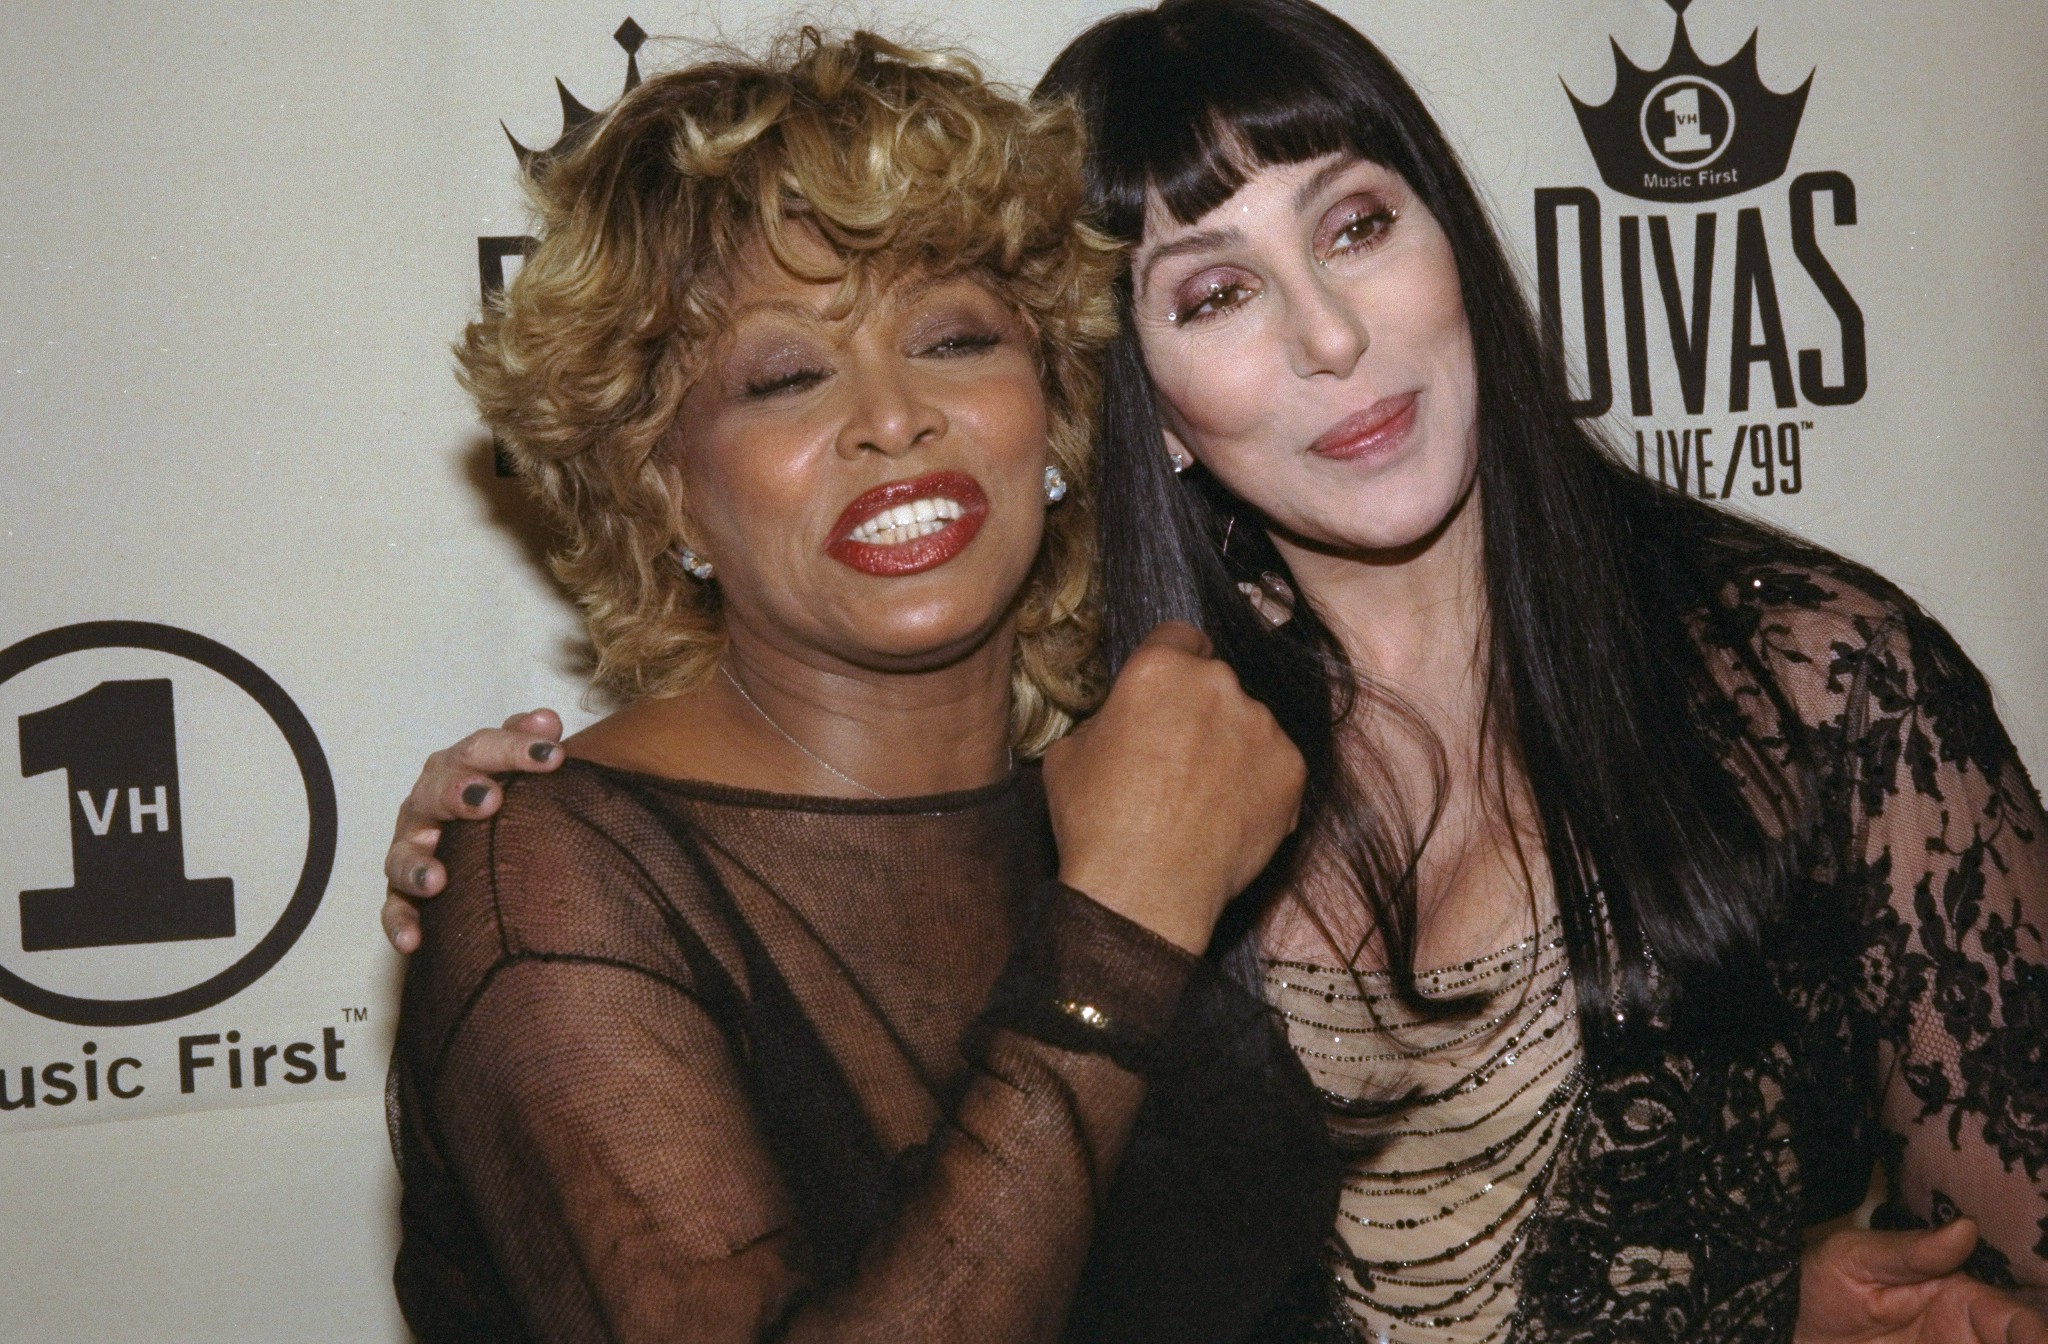 Tina Turner and Cher after their performances at the VH1 Divas Live concert on April 13, 1999 | Source: Getty Images